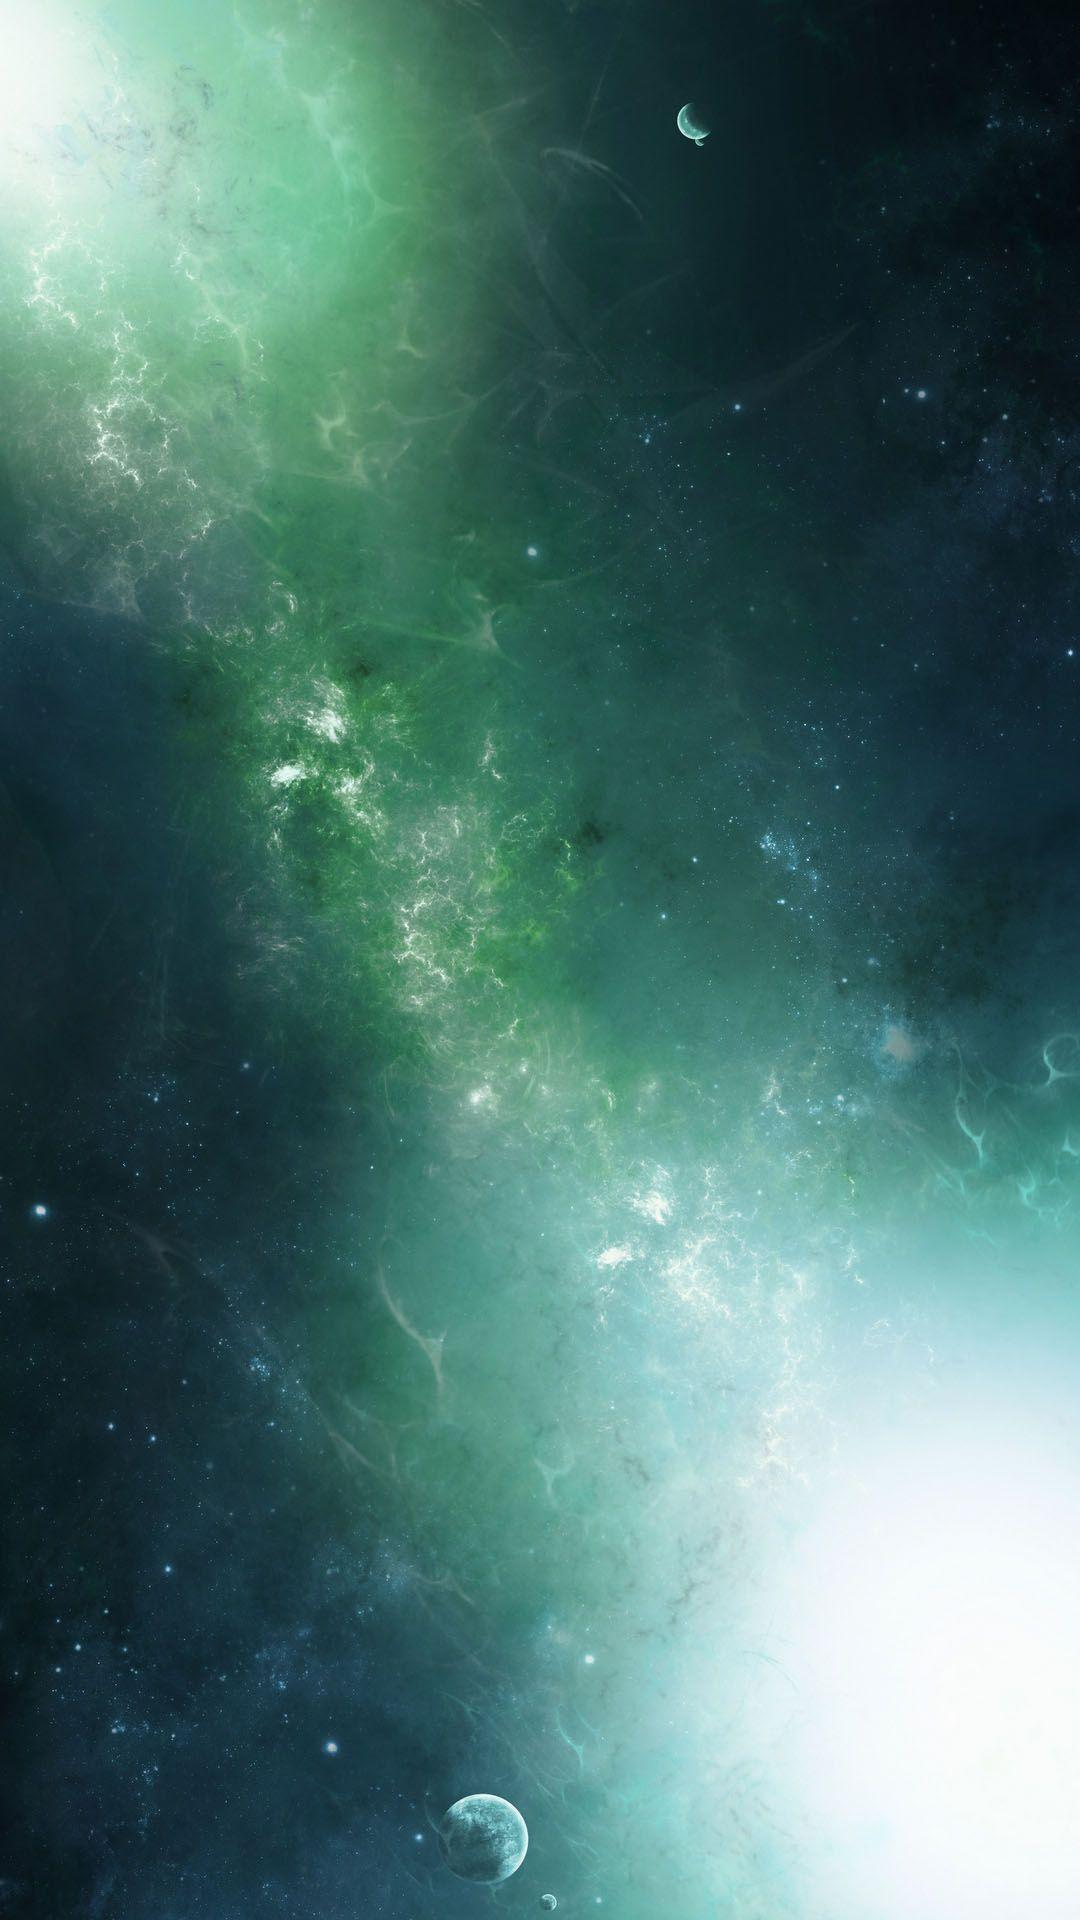 Space Background Green Realistic Cosmos Backdrop Starry Nebula With  Stardust And Milky Way Color Galaxy And Shining Stars Bright Space Objects  Vector Illustration Stock Illustration - Download Image Now - iStock